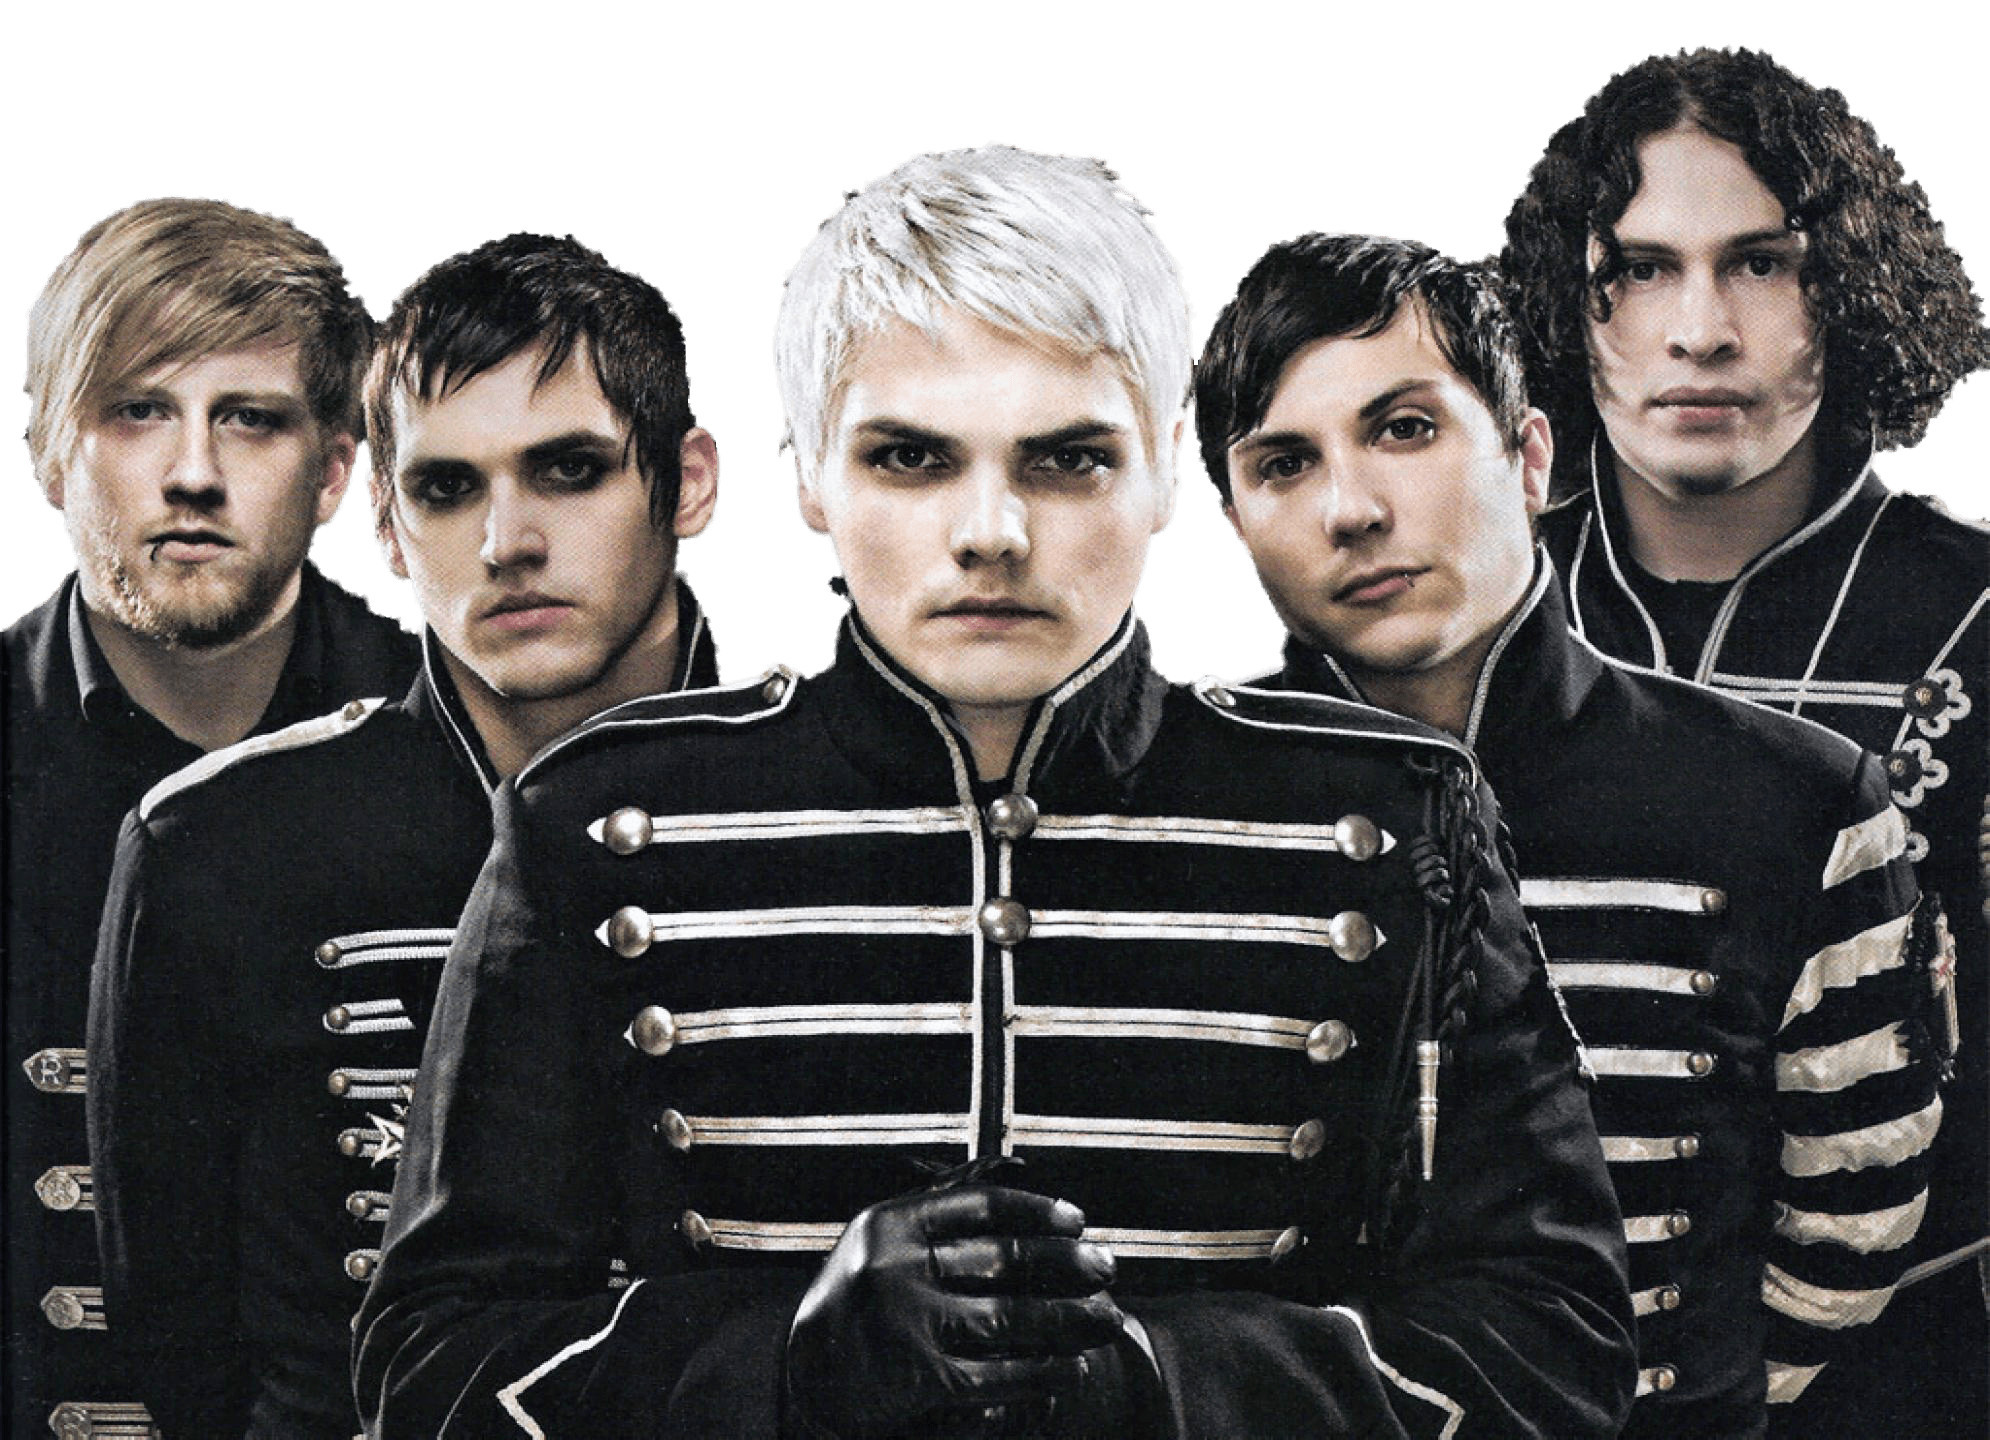 1990x1440 My Chemical Romance Wallpapers, High Quality Images of My Chemical .